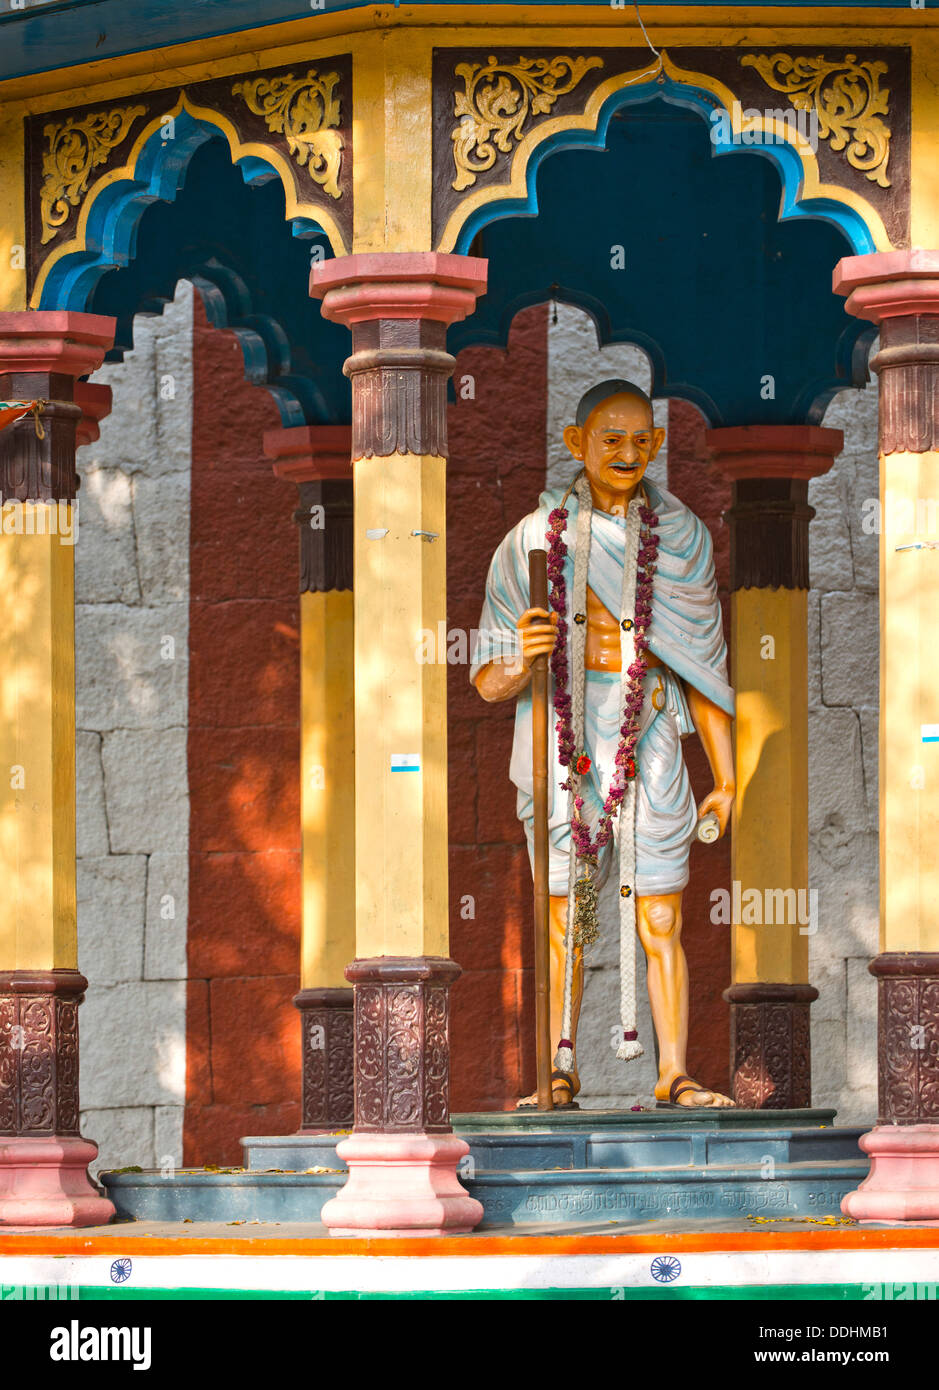 Representation of Mahatma Gandhi with walking stick in a small pavilion on the temple wall, Meenakshi Amman Temple or Sri Stock Photo